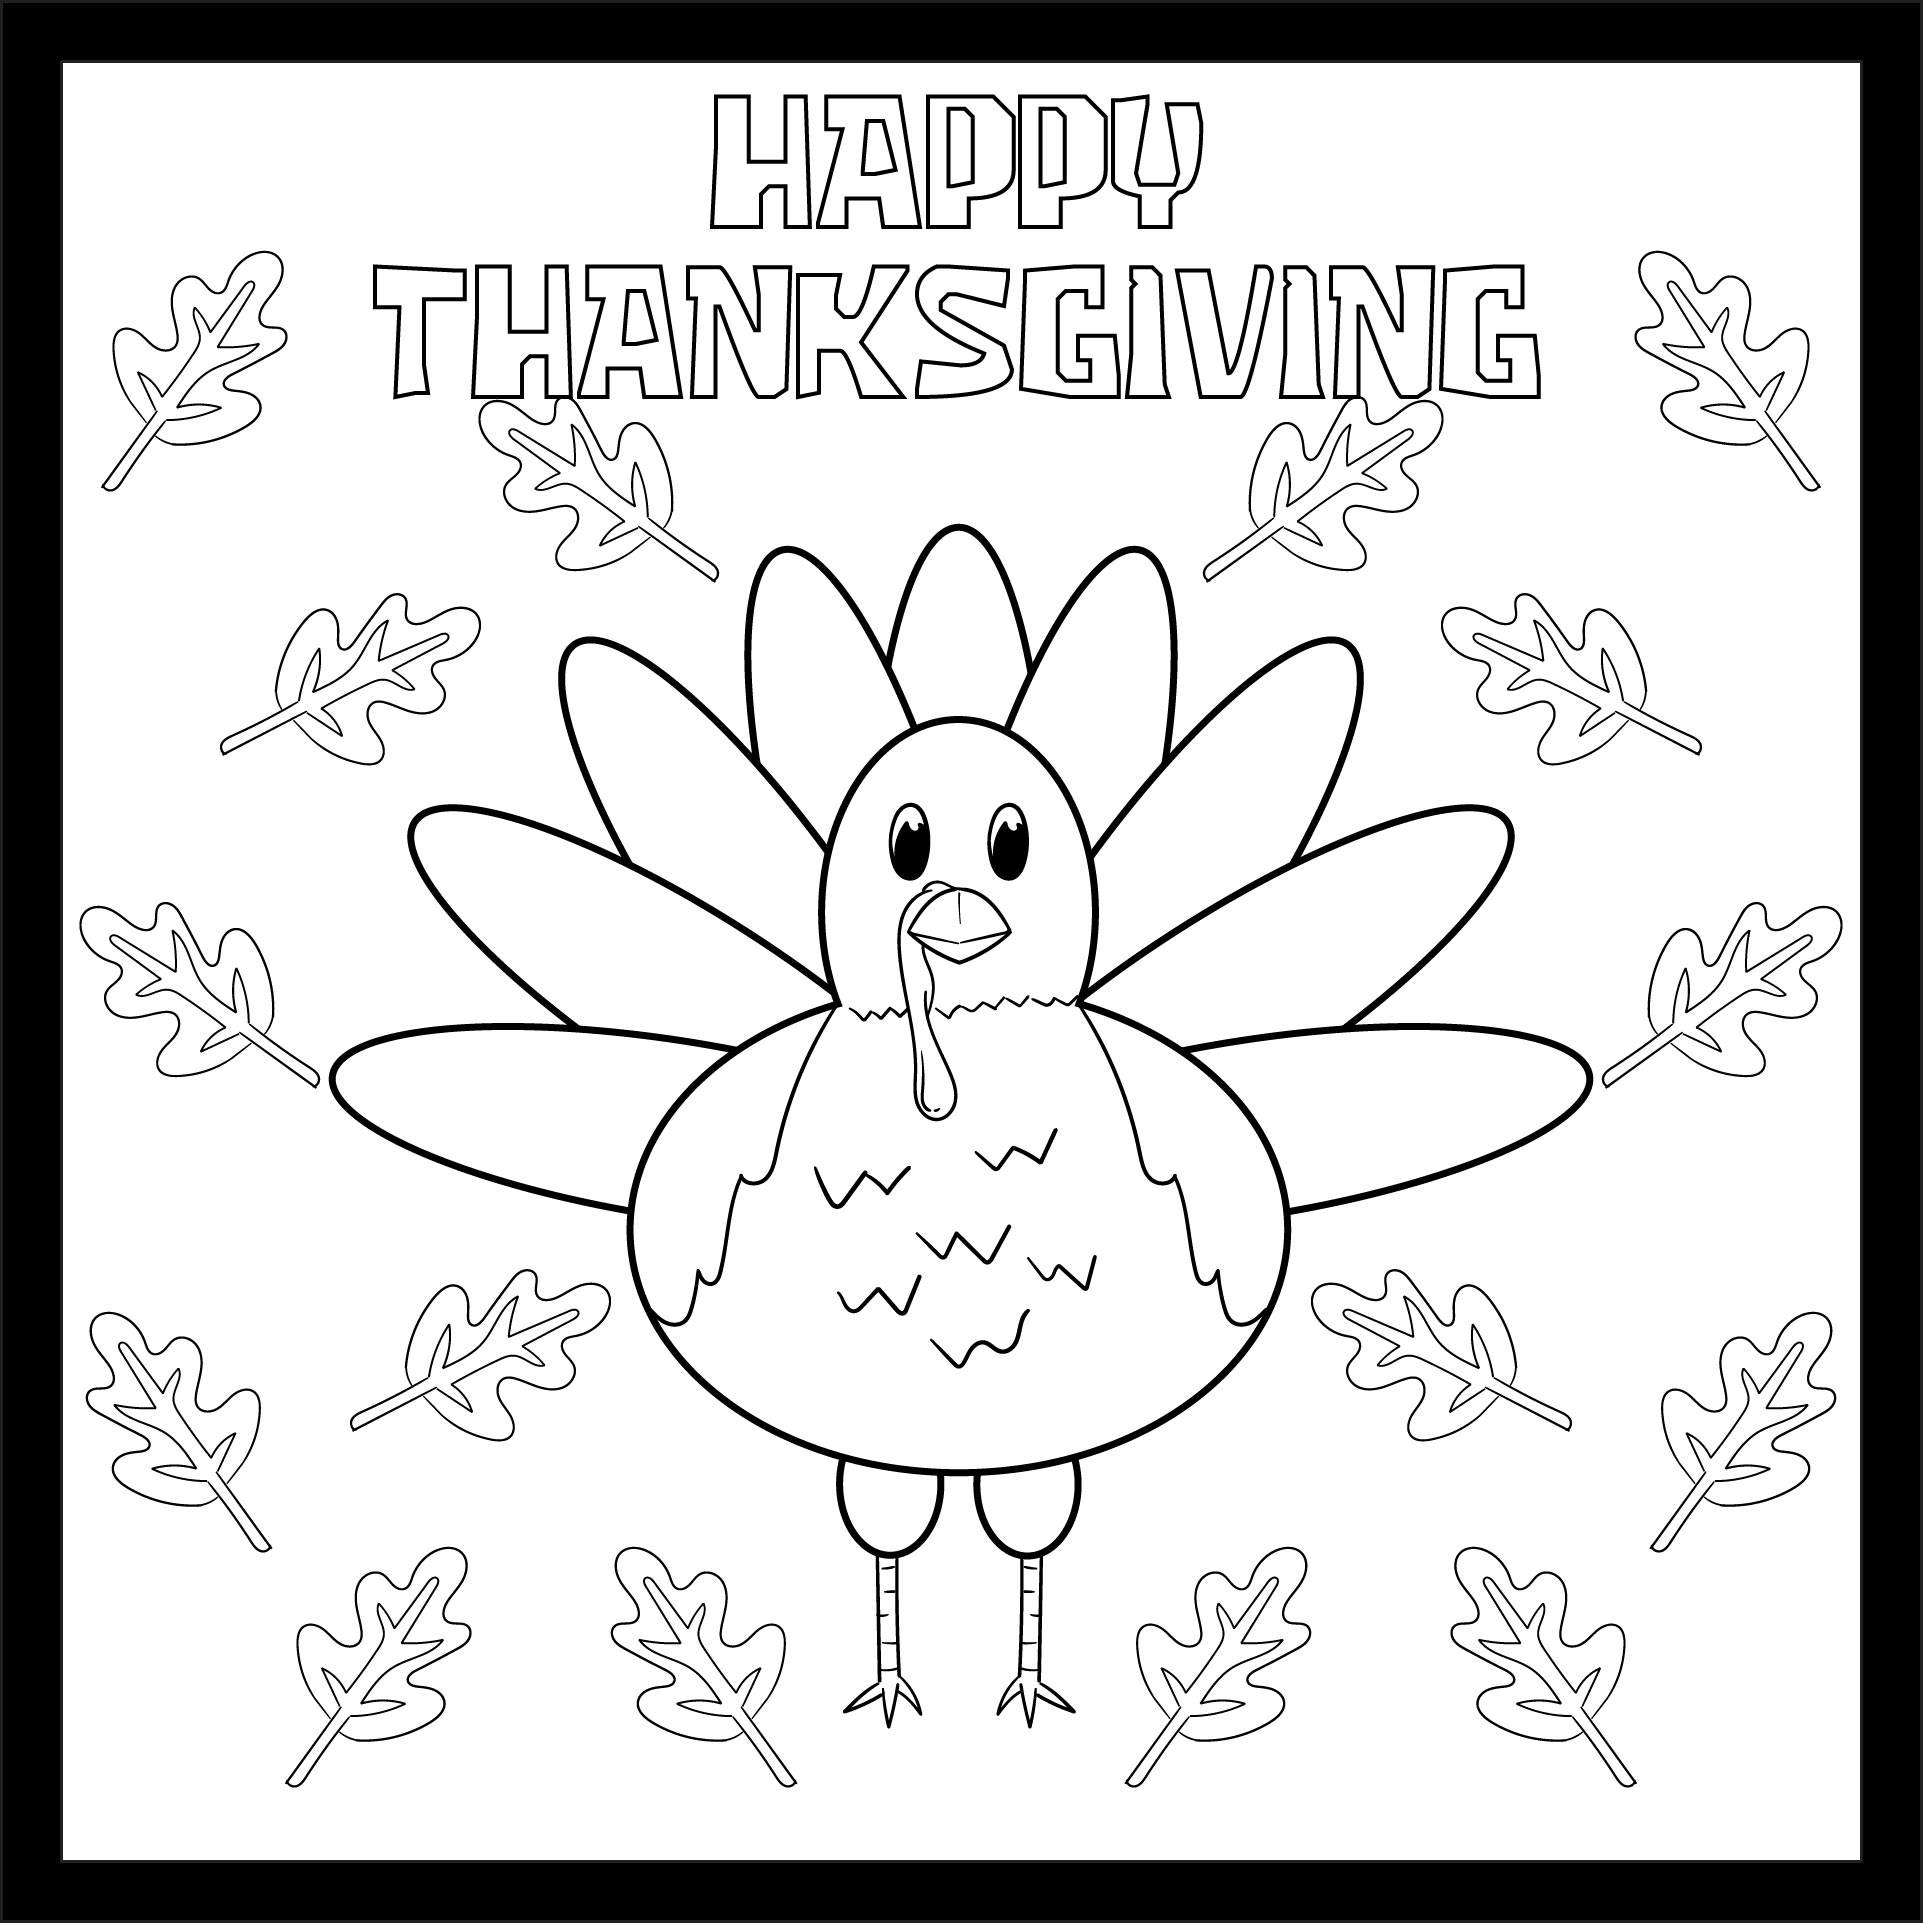 Printable Thanksgiving Activity Placemat